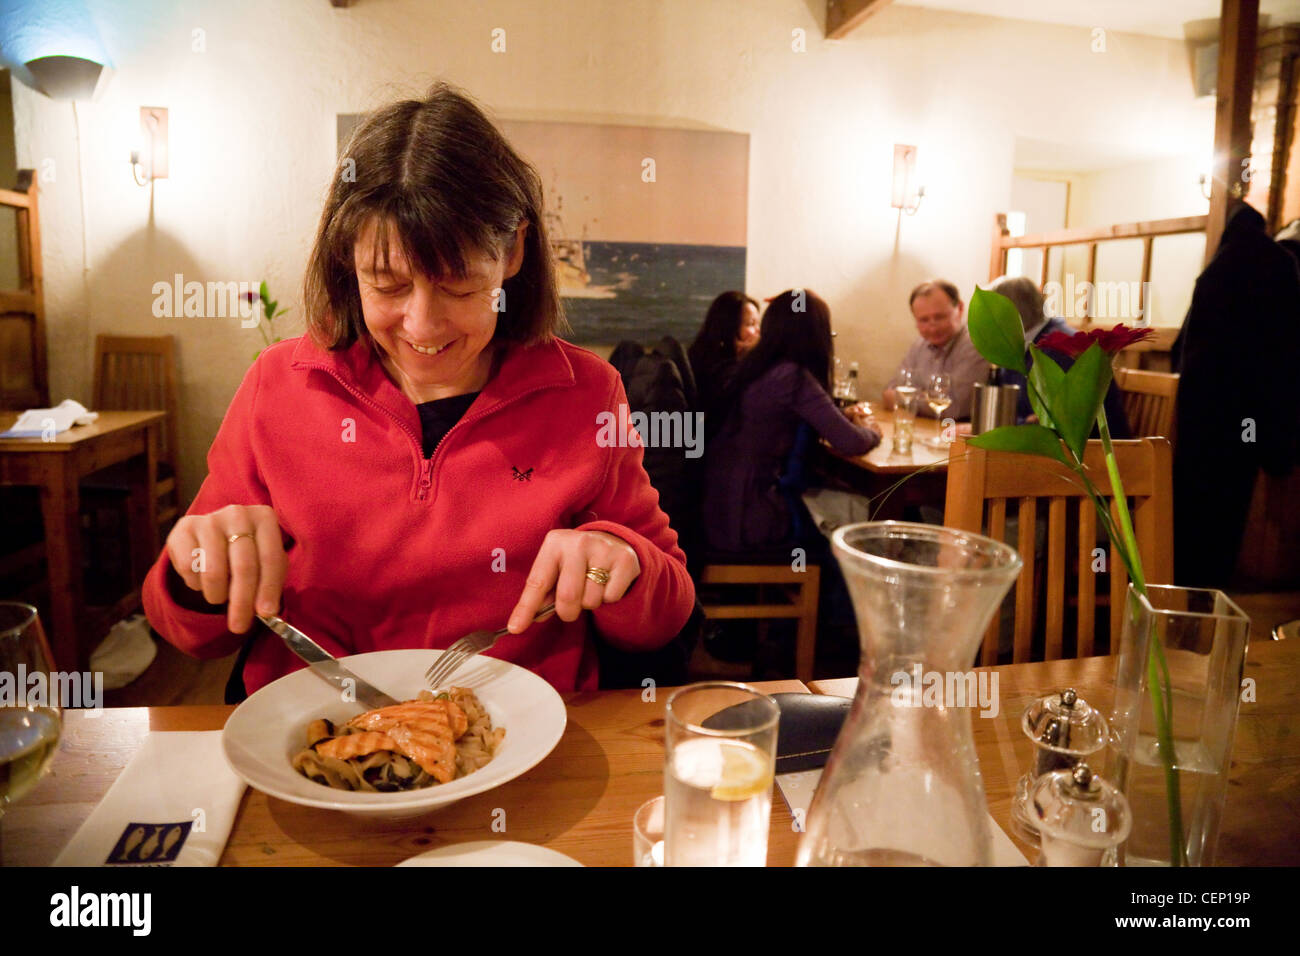 A woman eating a fish meal in a Loch Fyne restaurant, Cambridge UK Stock Photo